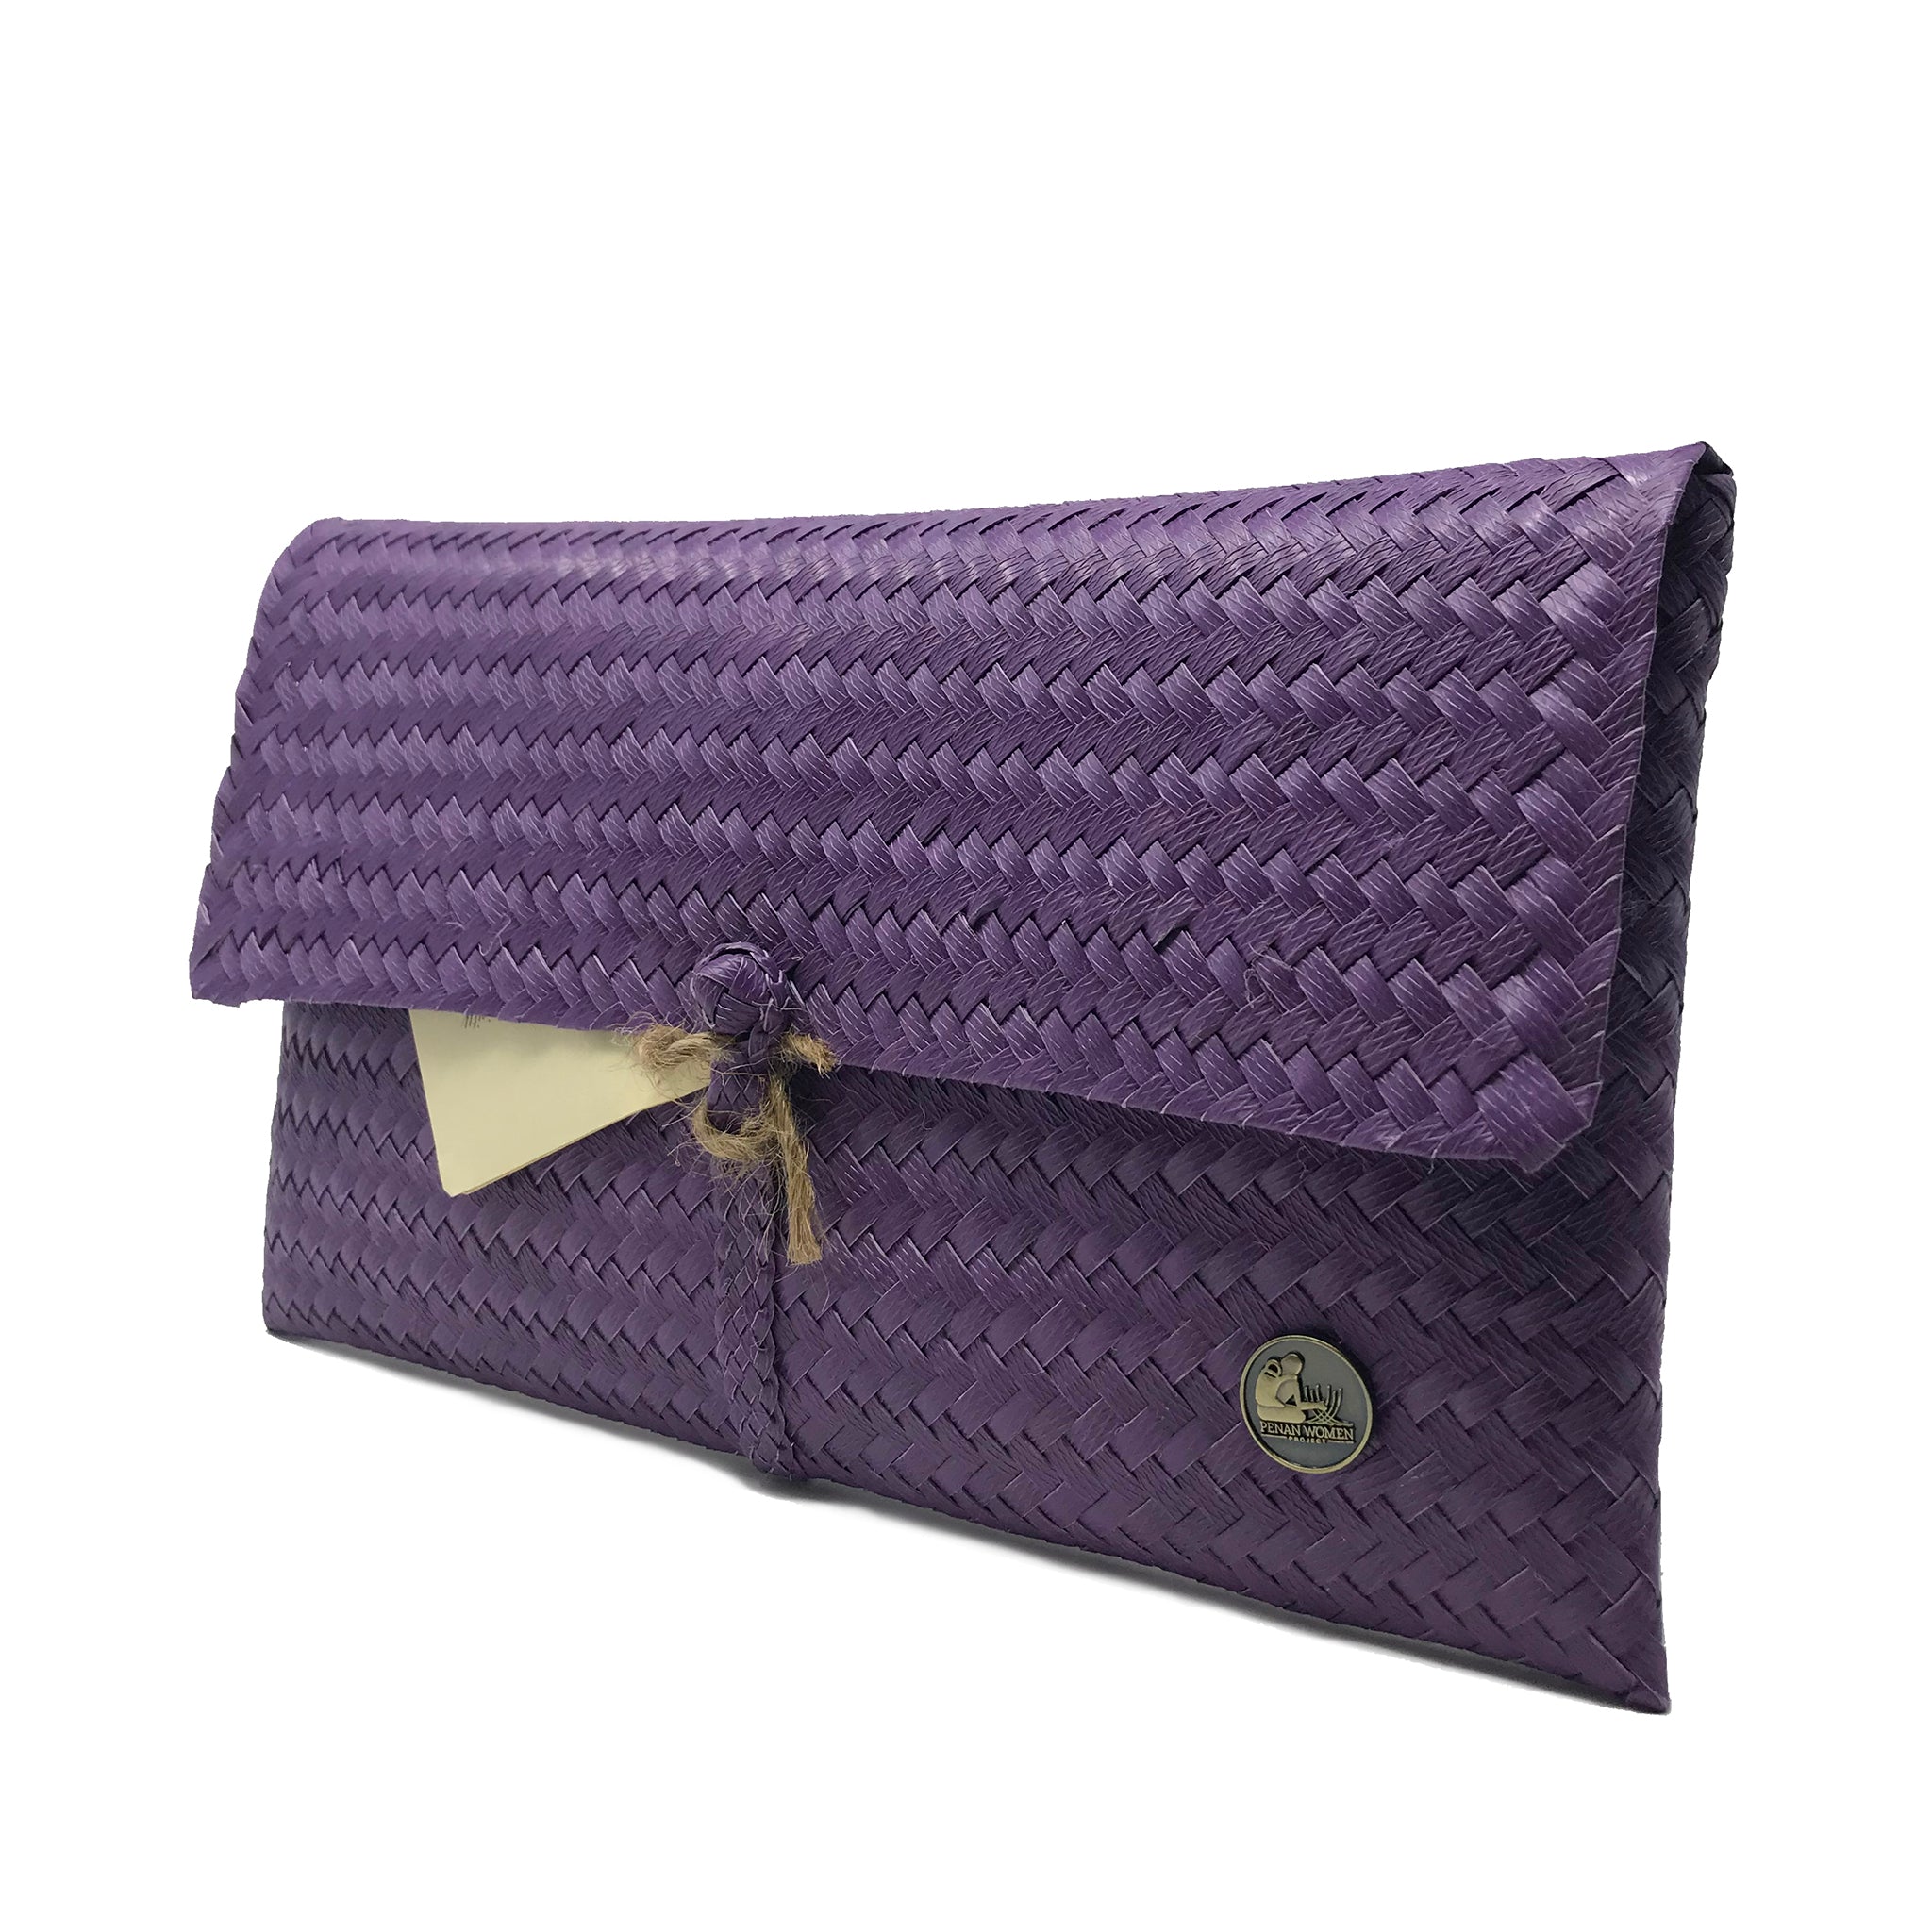 Purple clutch at a 45-degree angle.